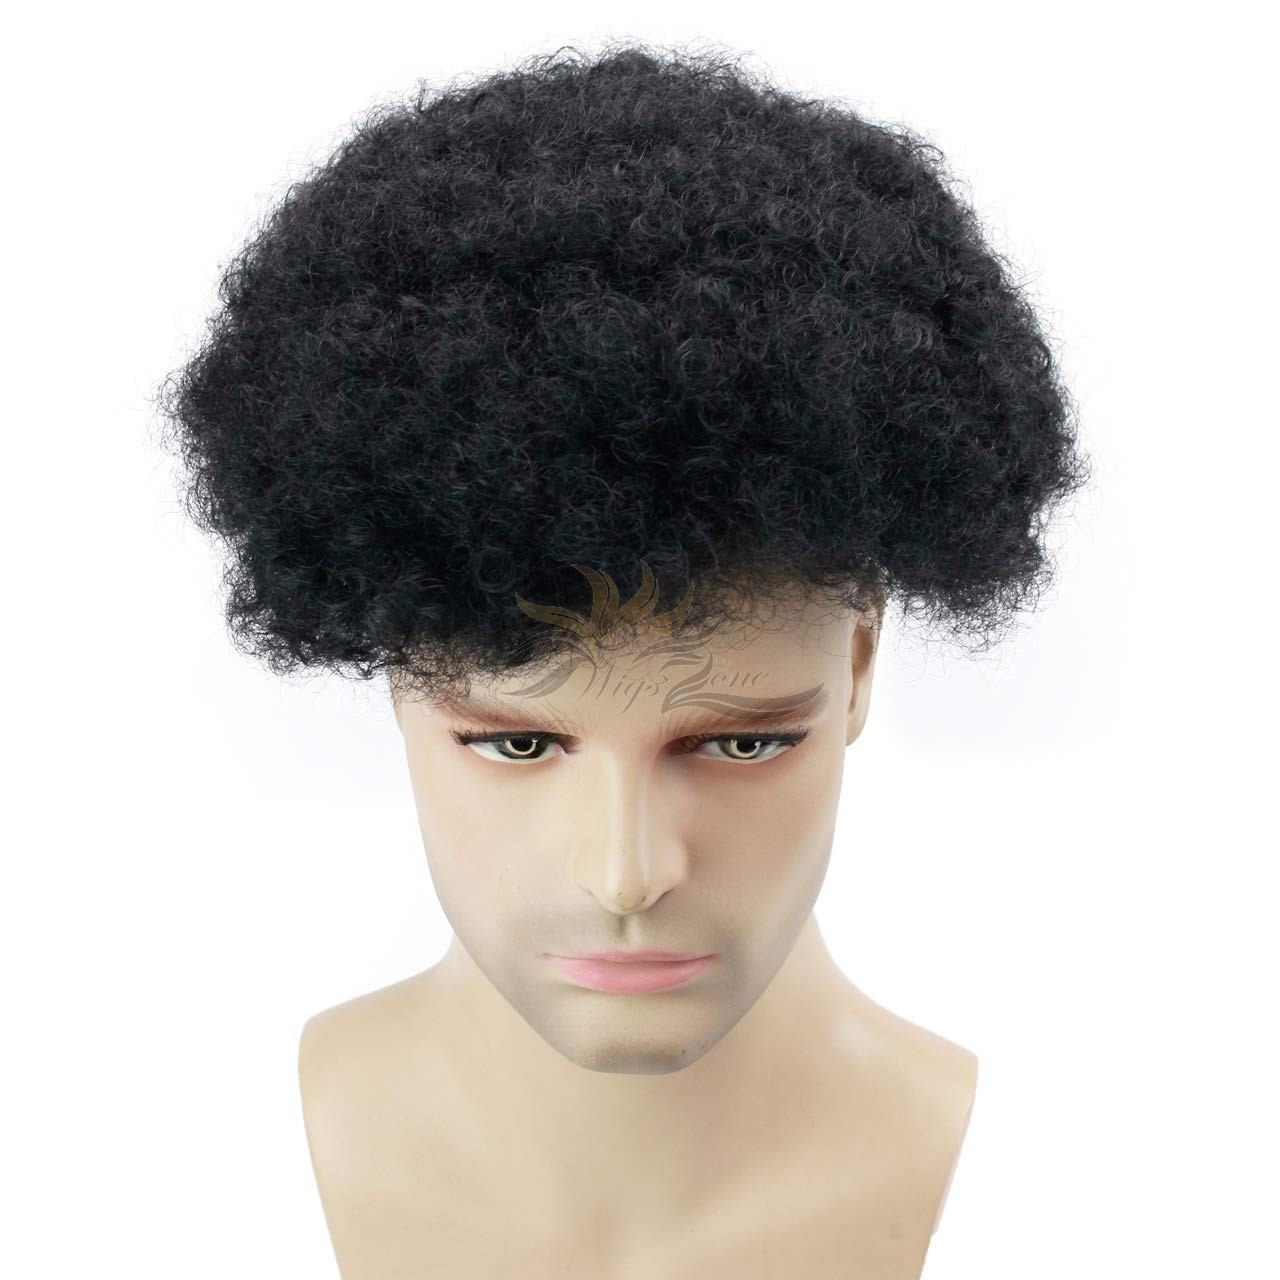 Full Super Fine Swiss Lace Men's Toupee for Black Men Afro Toupee African American Hair Piece African Curly Afro Men's Replacement [T26]